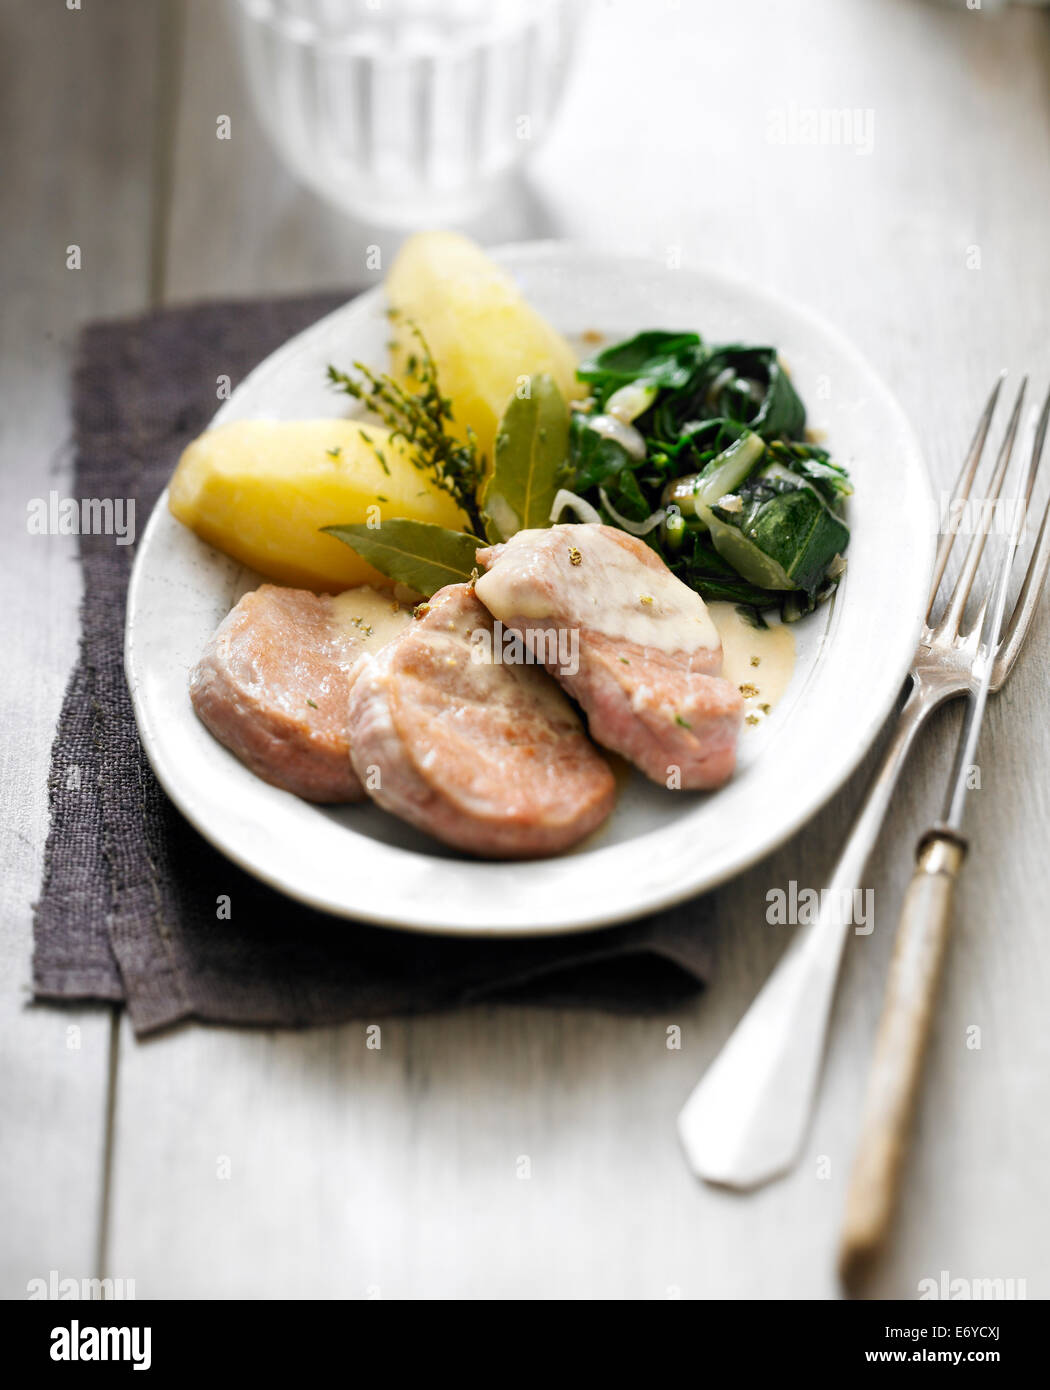 Pork Filet mignon with green pepper sauce,sauteed beets and boiled potatoes Stock Photo